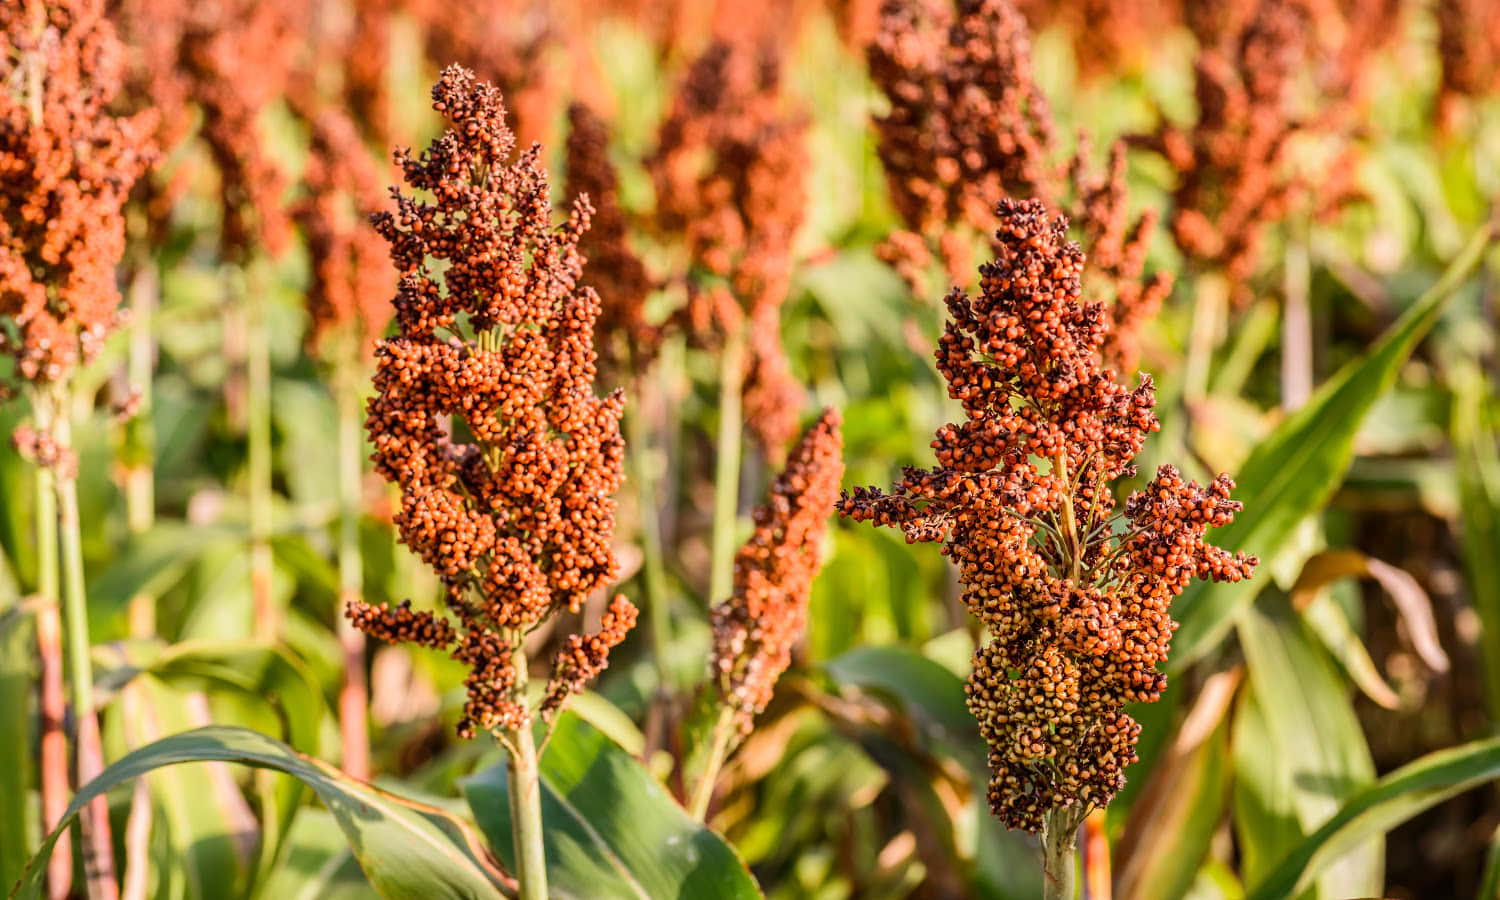 Climate-resilient grains like pearl millet and sorghum can help subsistence farmers in Chad enjoy increased crop yields and better self-resilience.